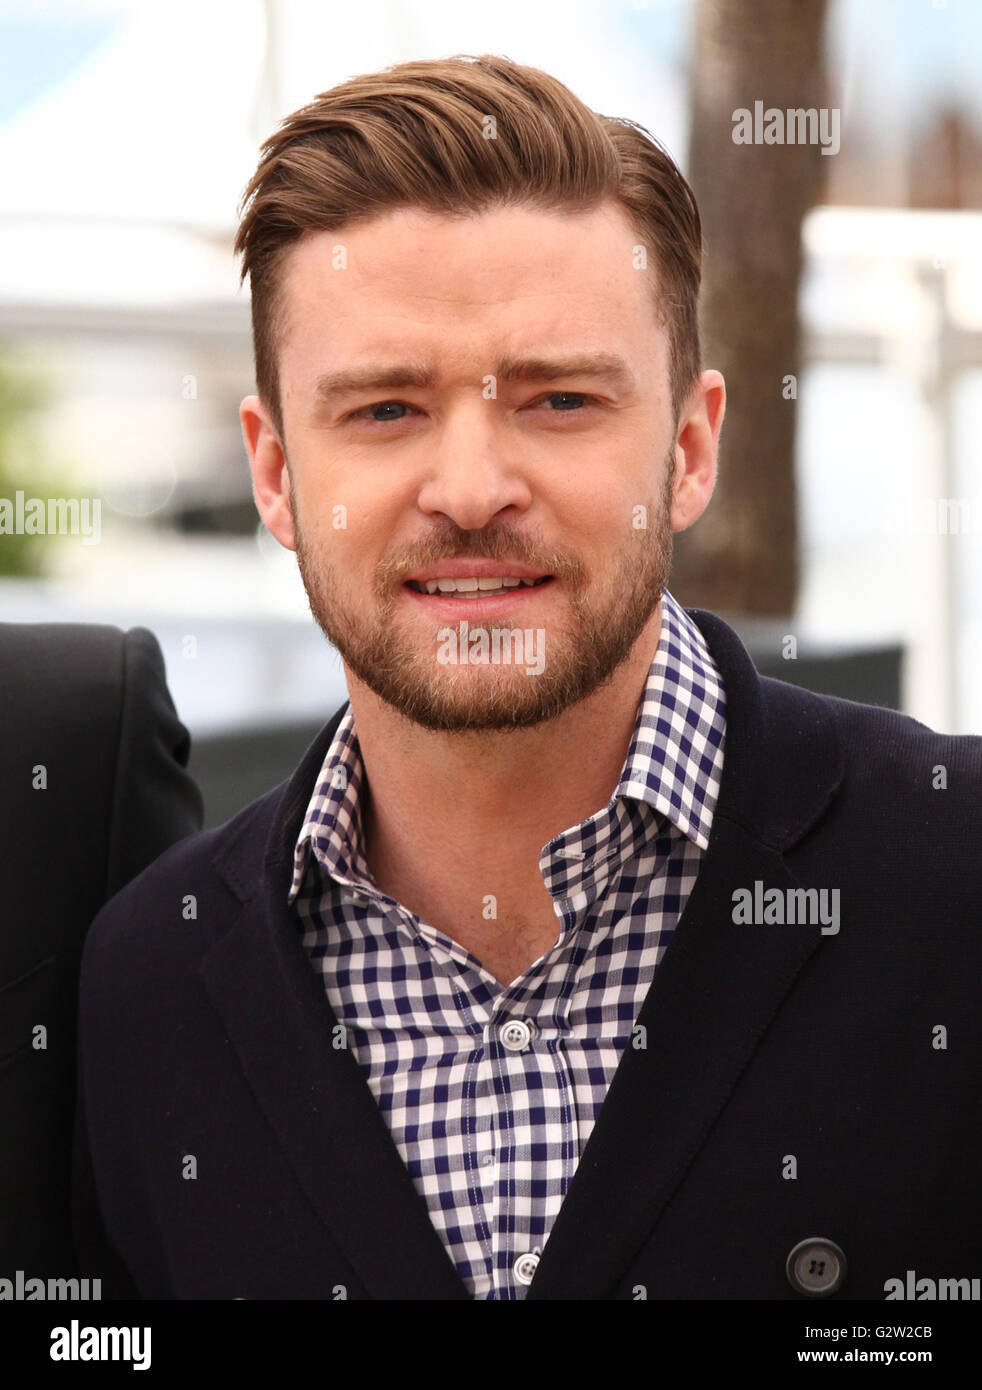 Justin Timberlake attends a photocall at the Cannes film festival on May 22, 2013 in Cannes Stock Photo